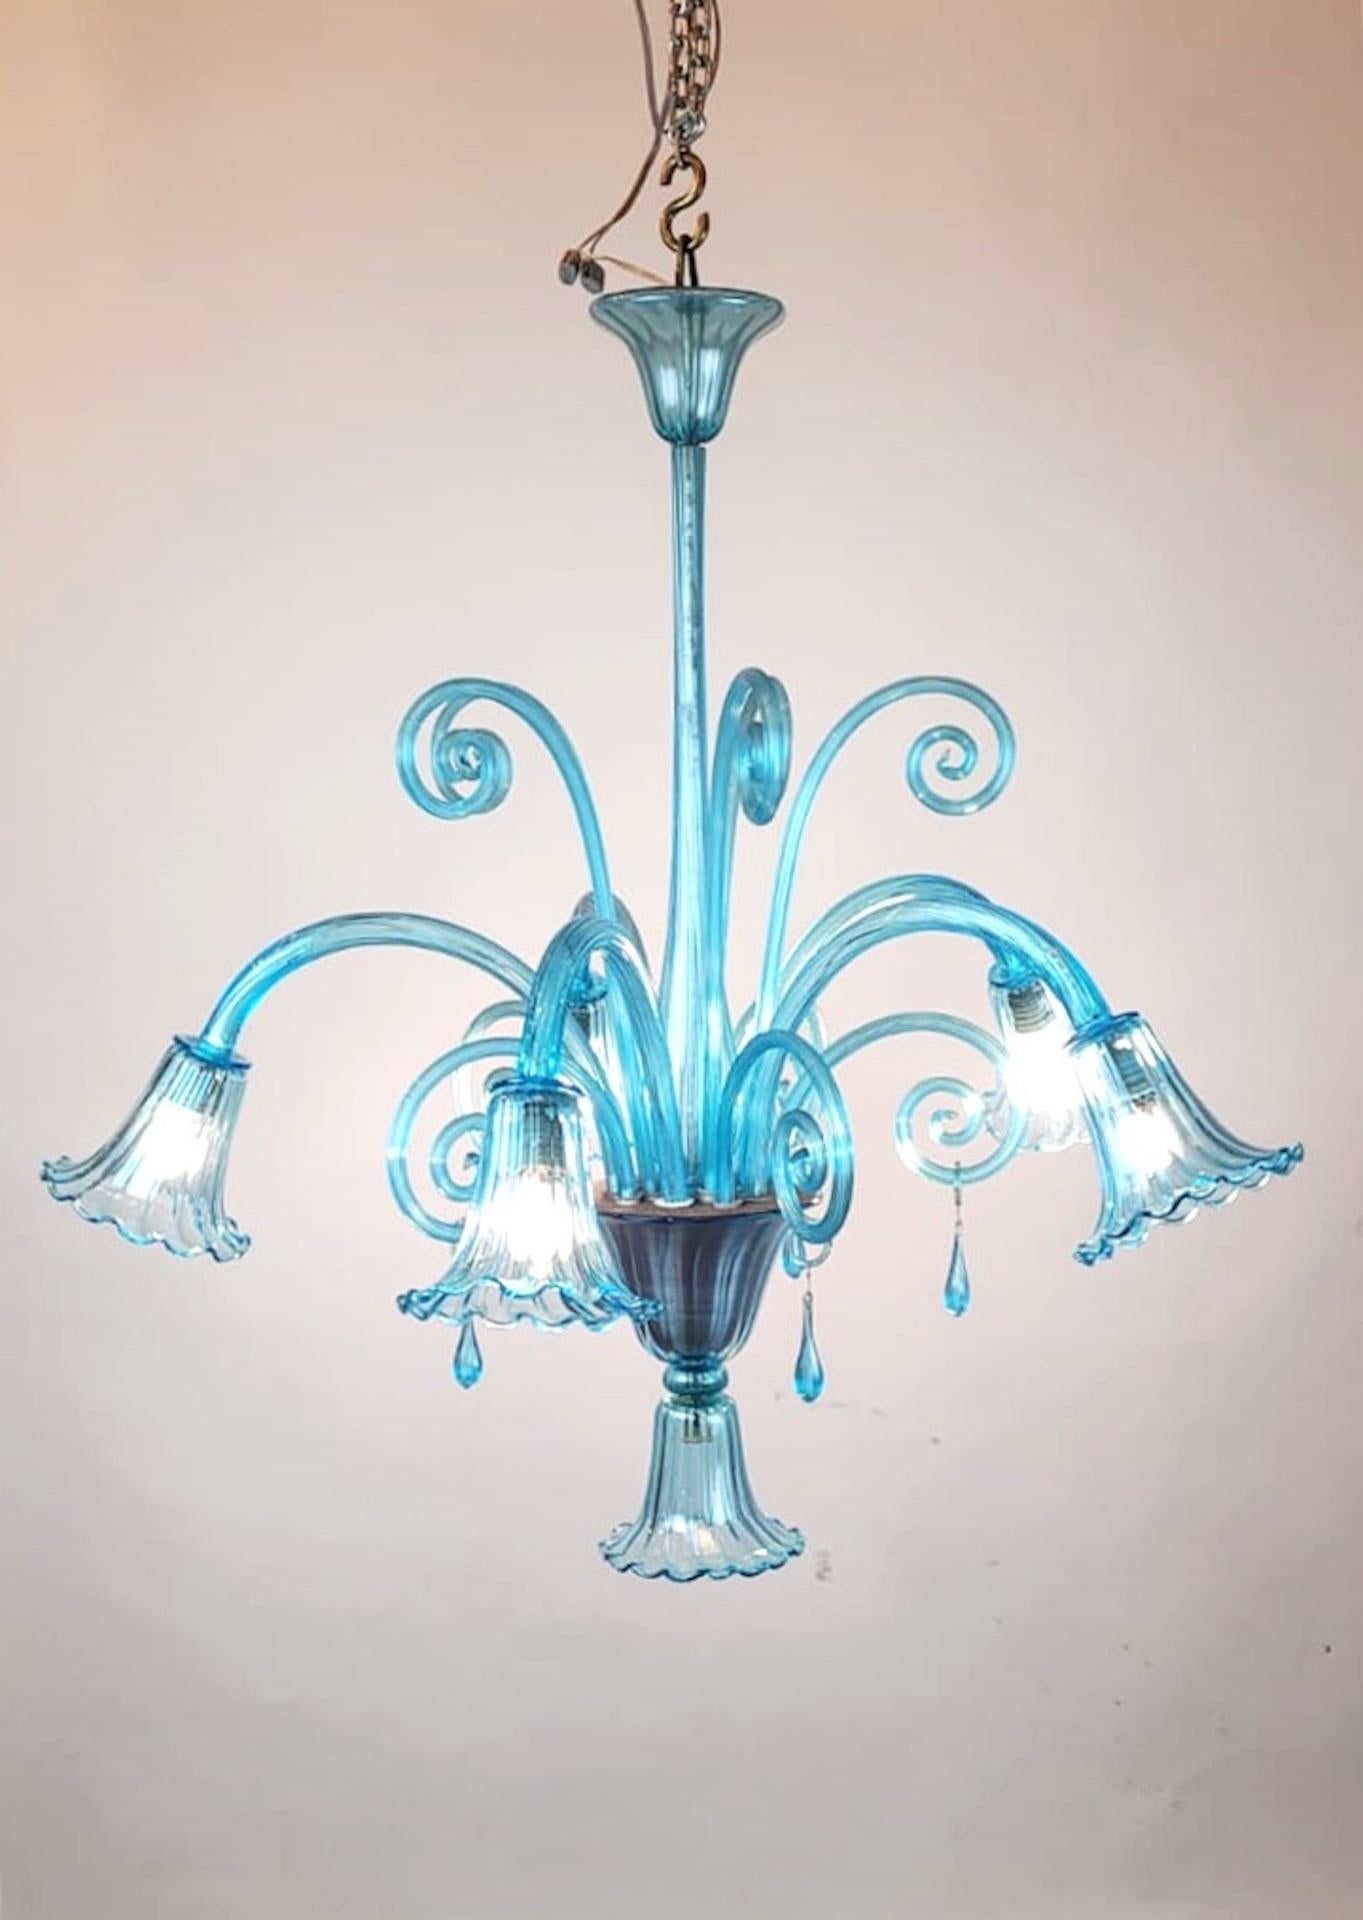 Murano Blue Glass Chandelier - 5 Arms Of Light, 1940s For Sale 4